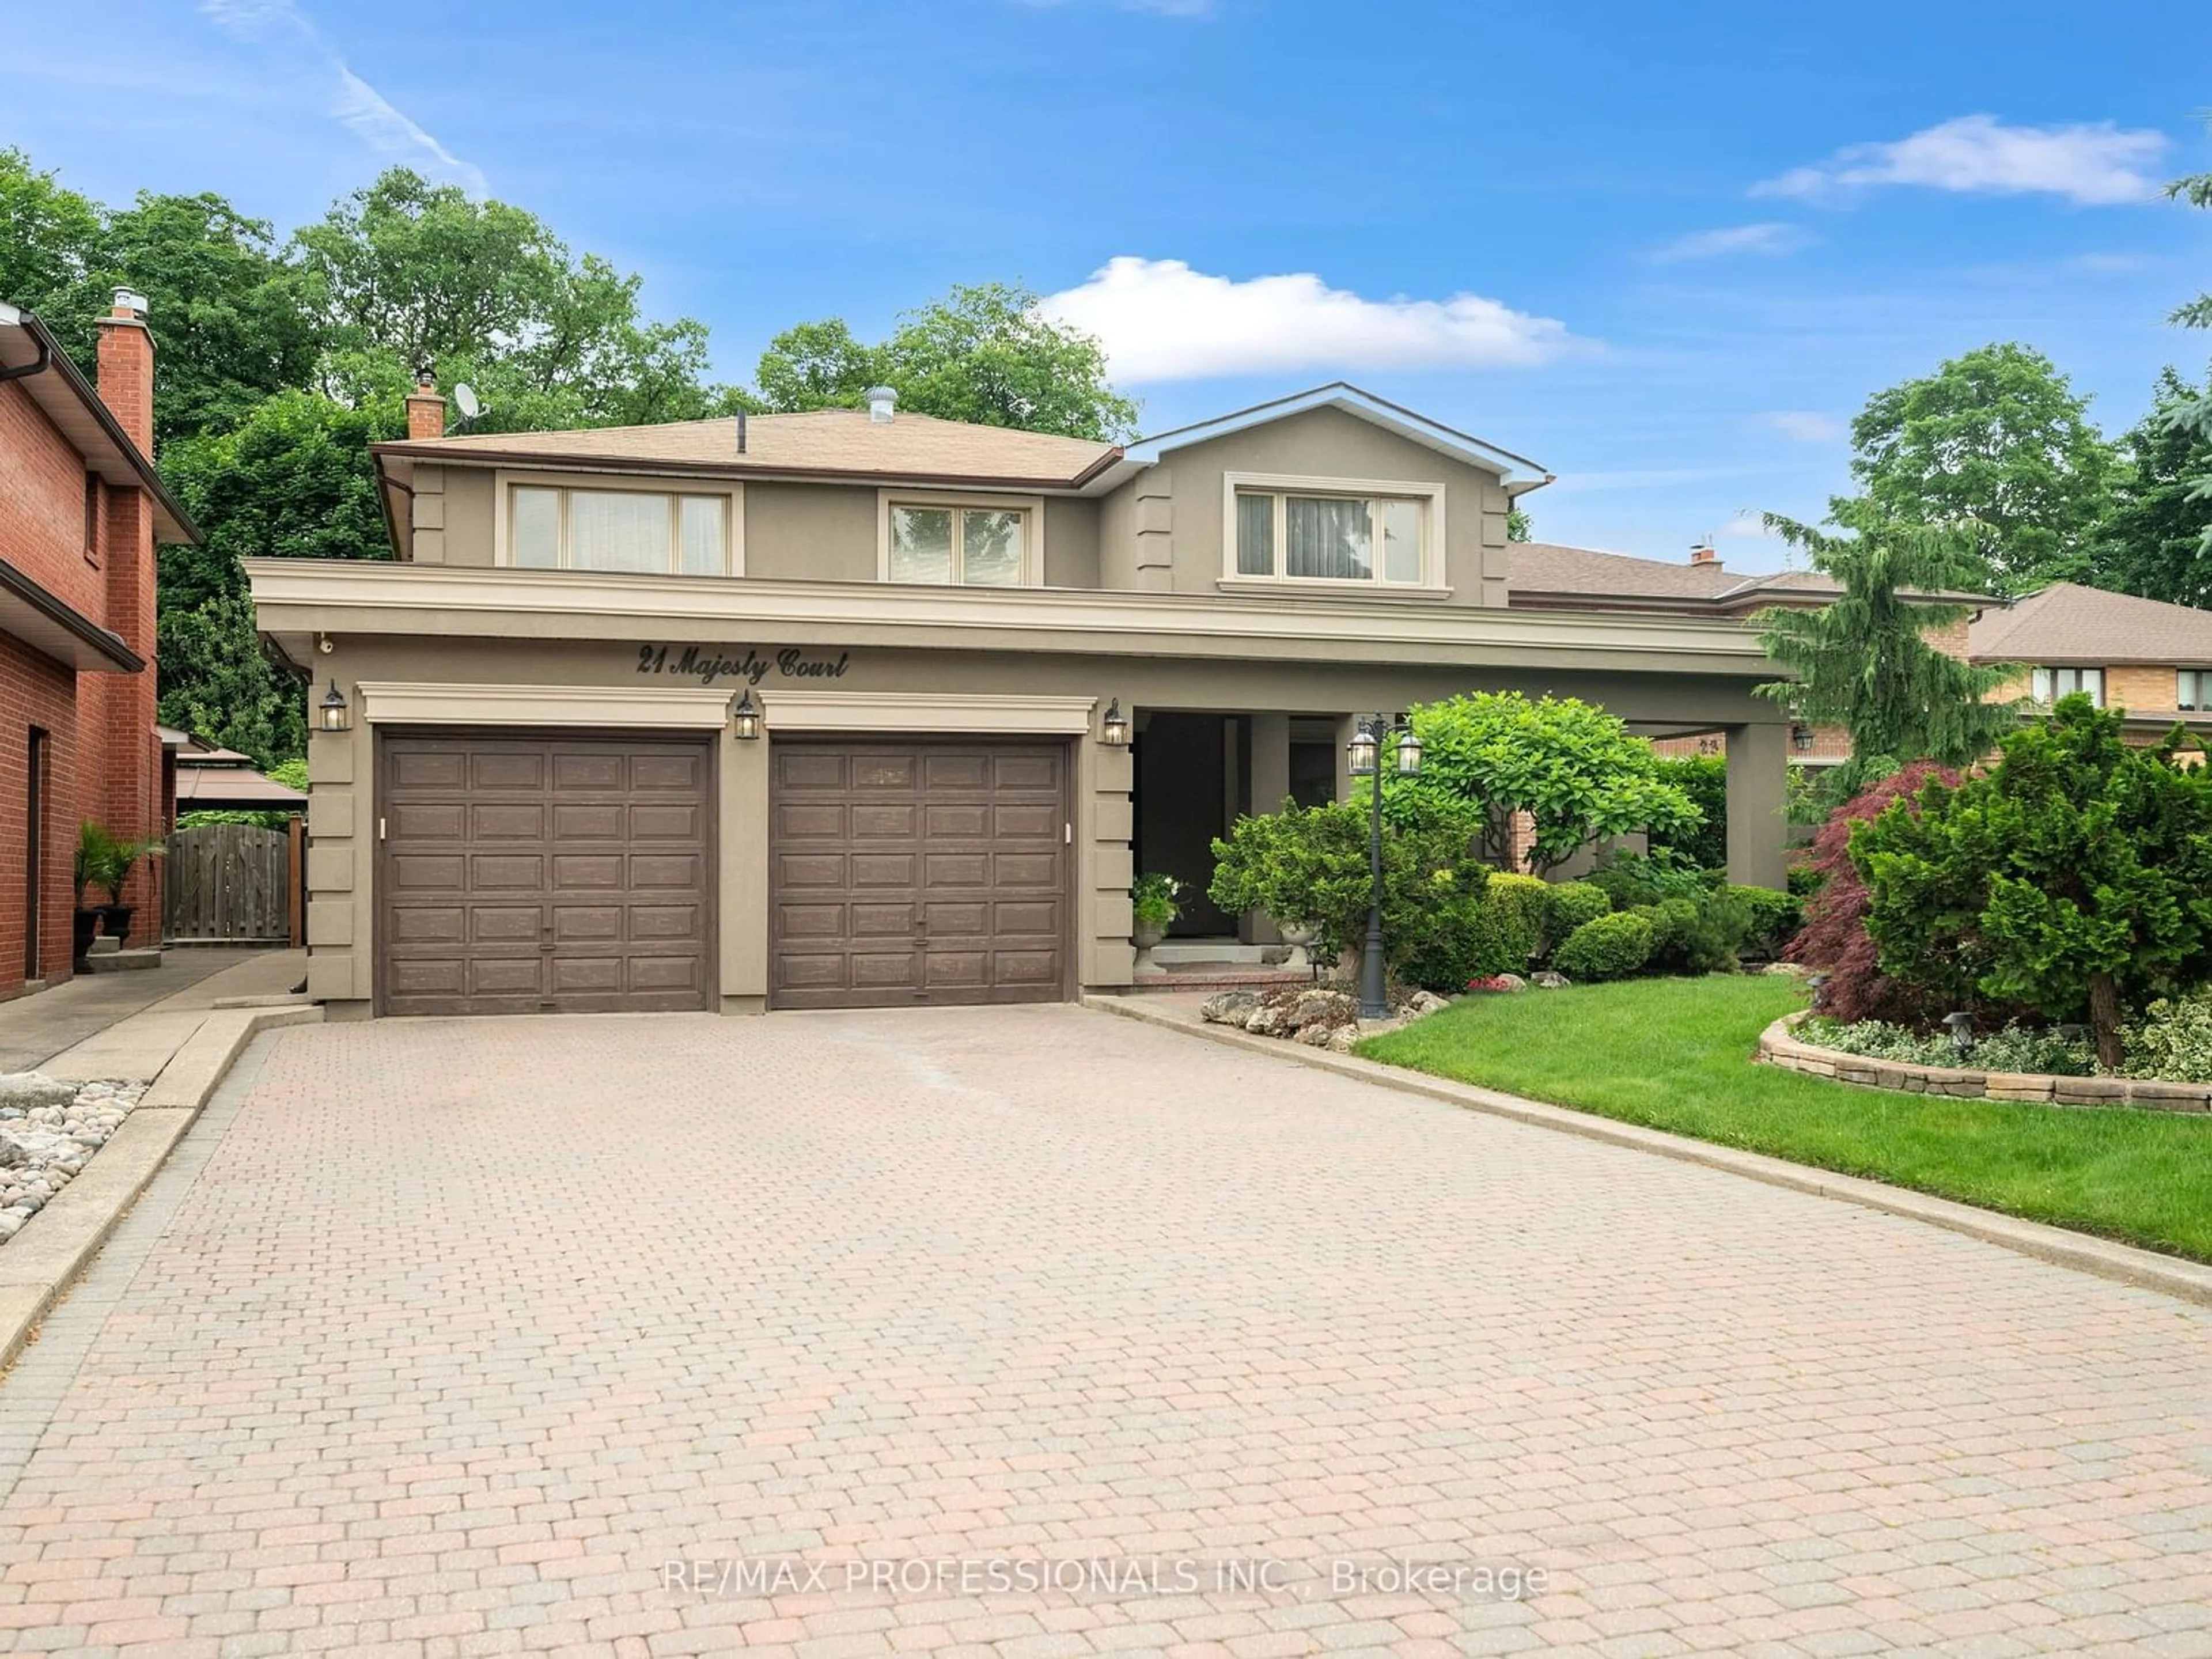 Home with brick exterior material for 21 Majesty Crt, Vaughan Ontario L4L 3S6